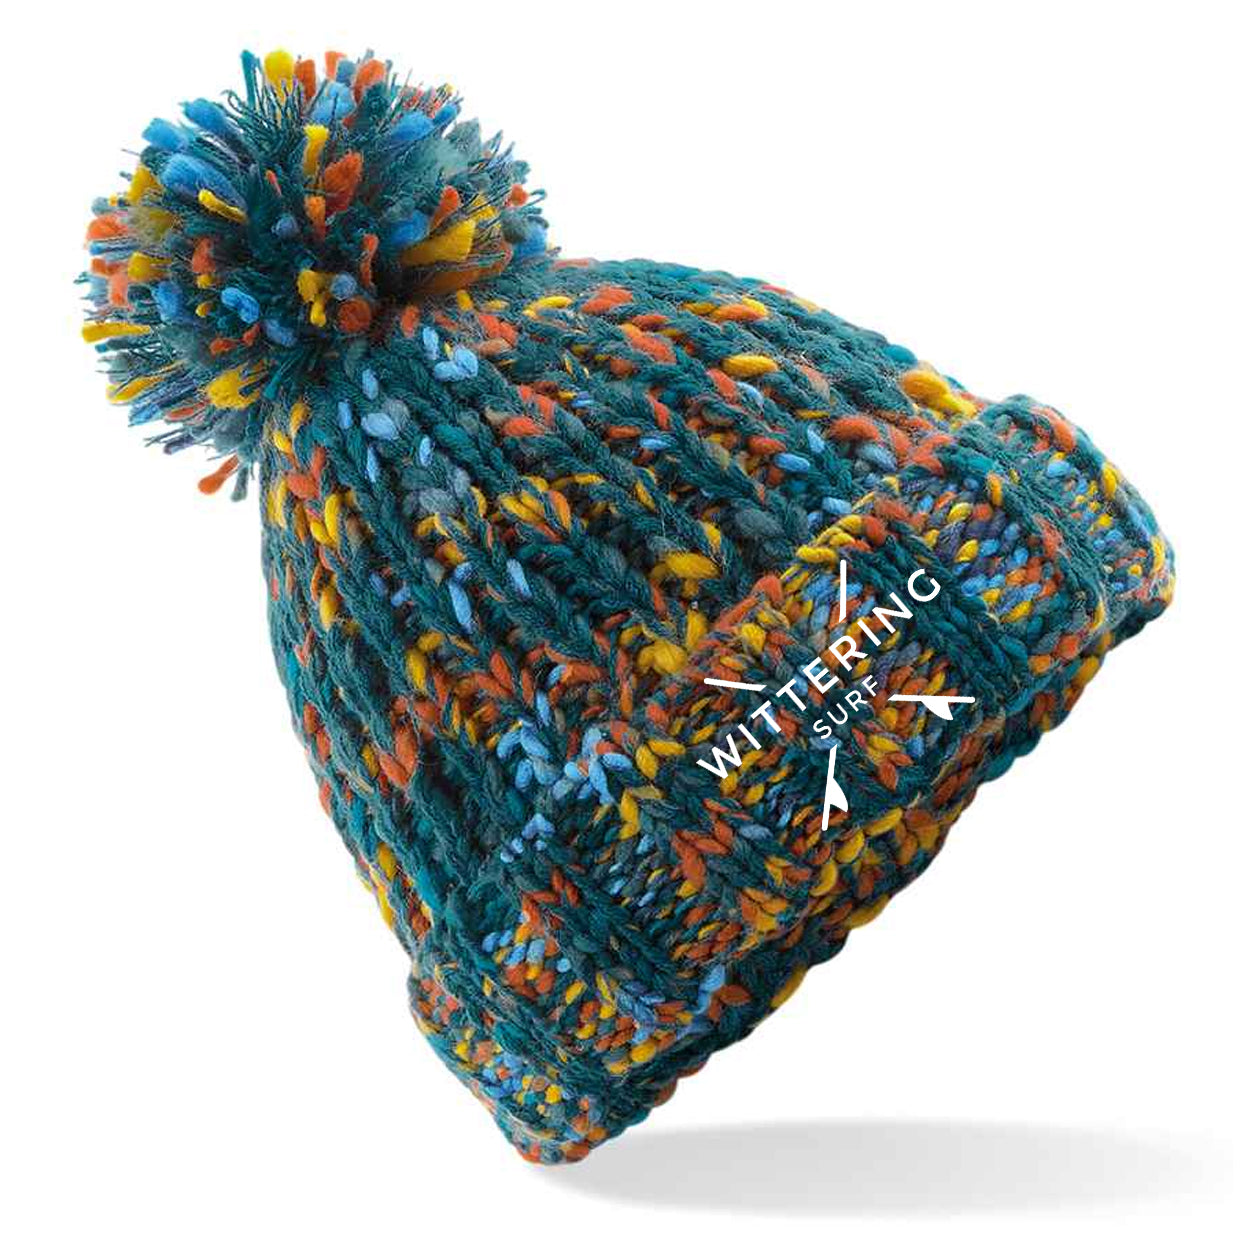 STORM CHASER BEANIE - RETRO GROOVE - Wittering Surf Shop